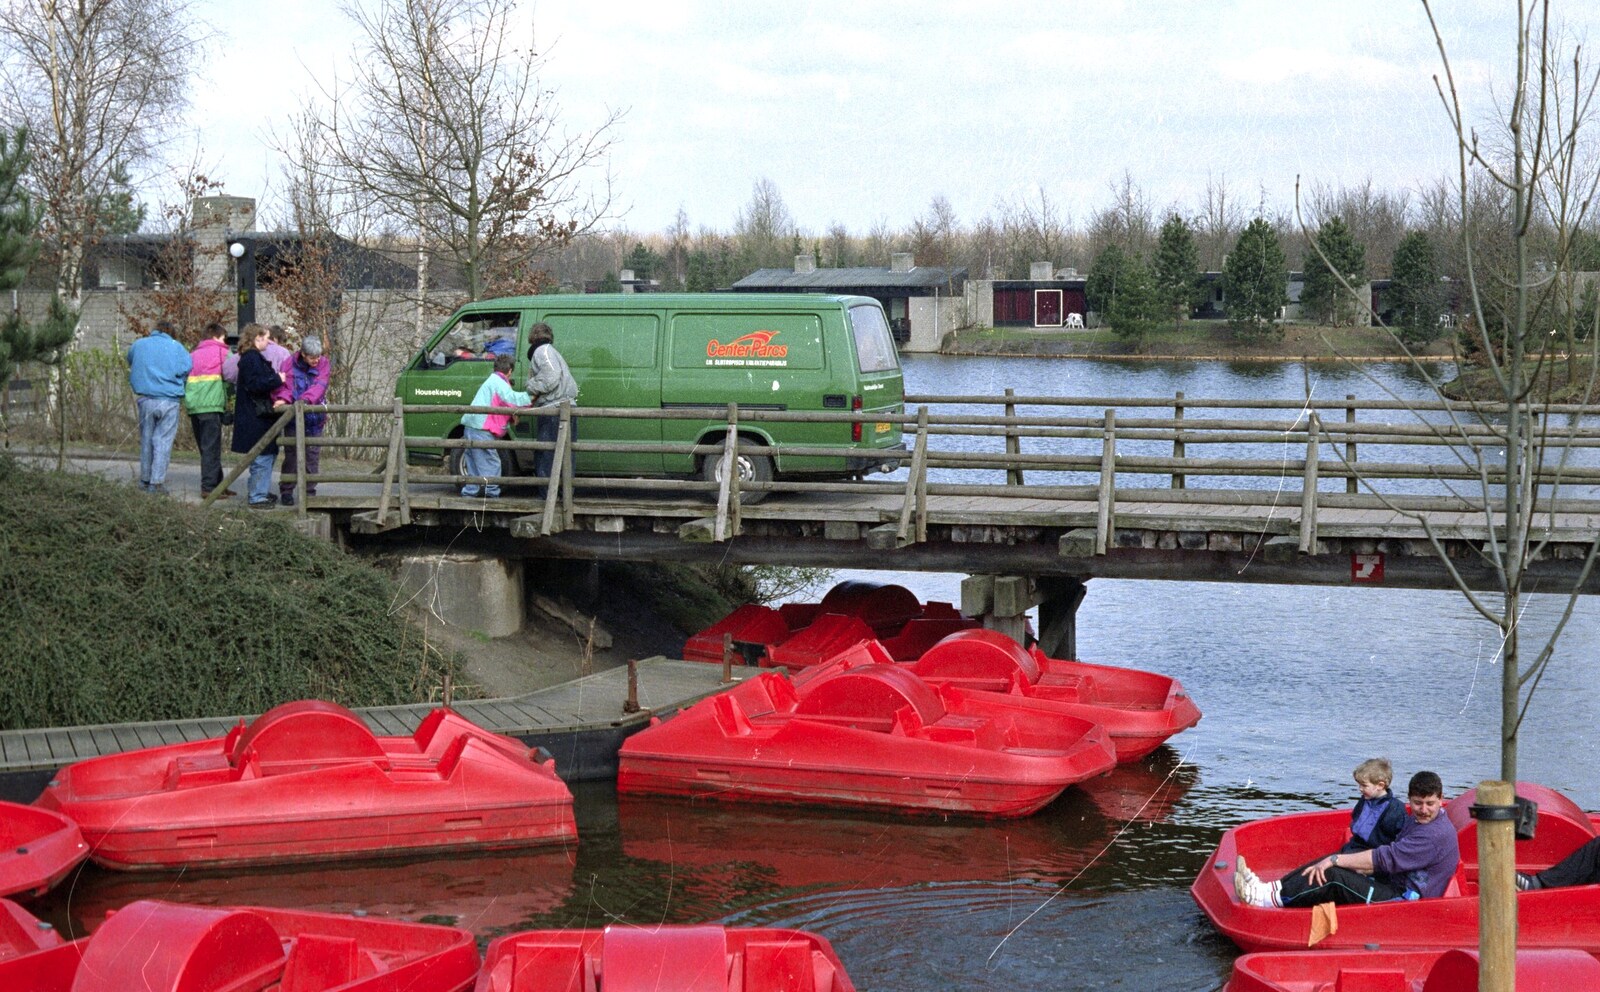 A Trip to Center Parcs, Eemhof, Netherlands - 24th March 1992: Bright red pedaloes